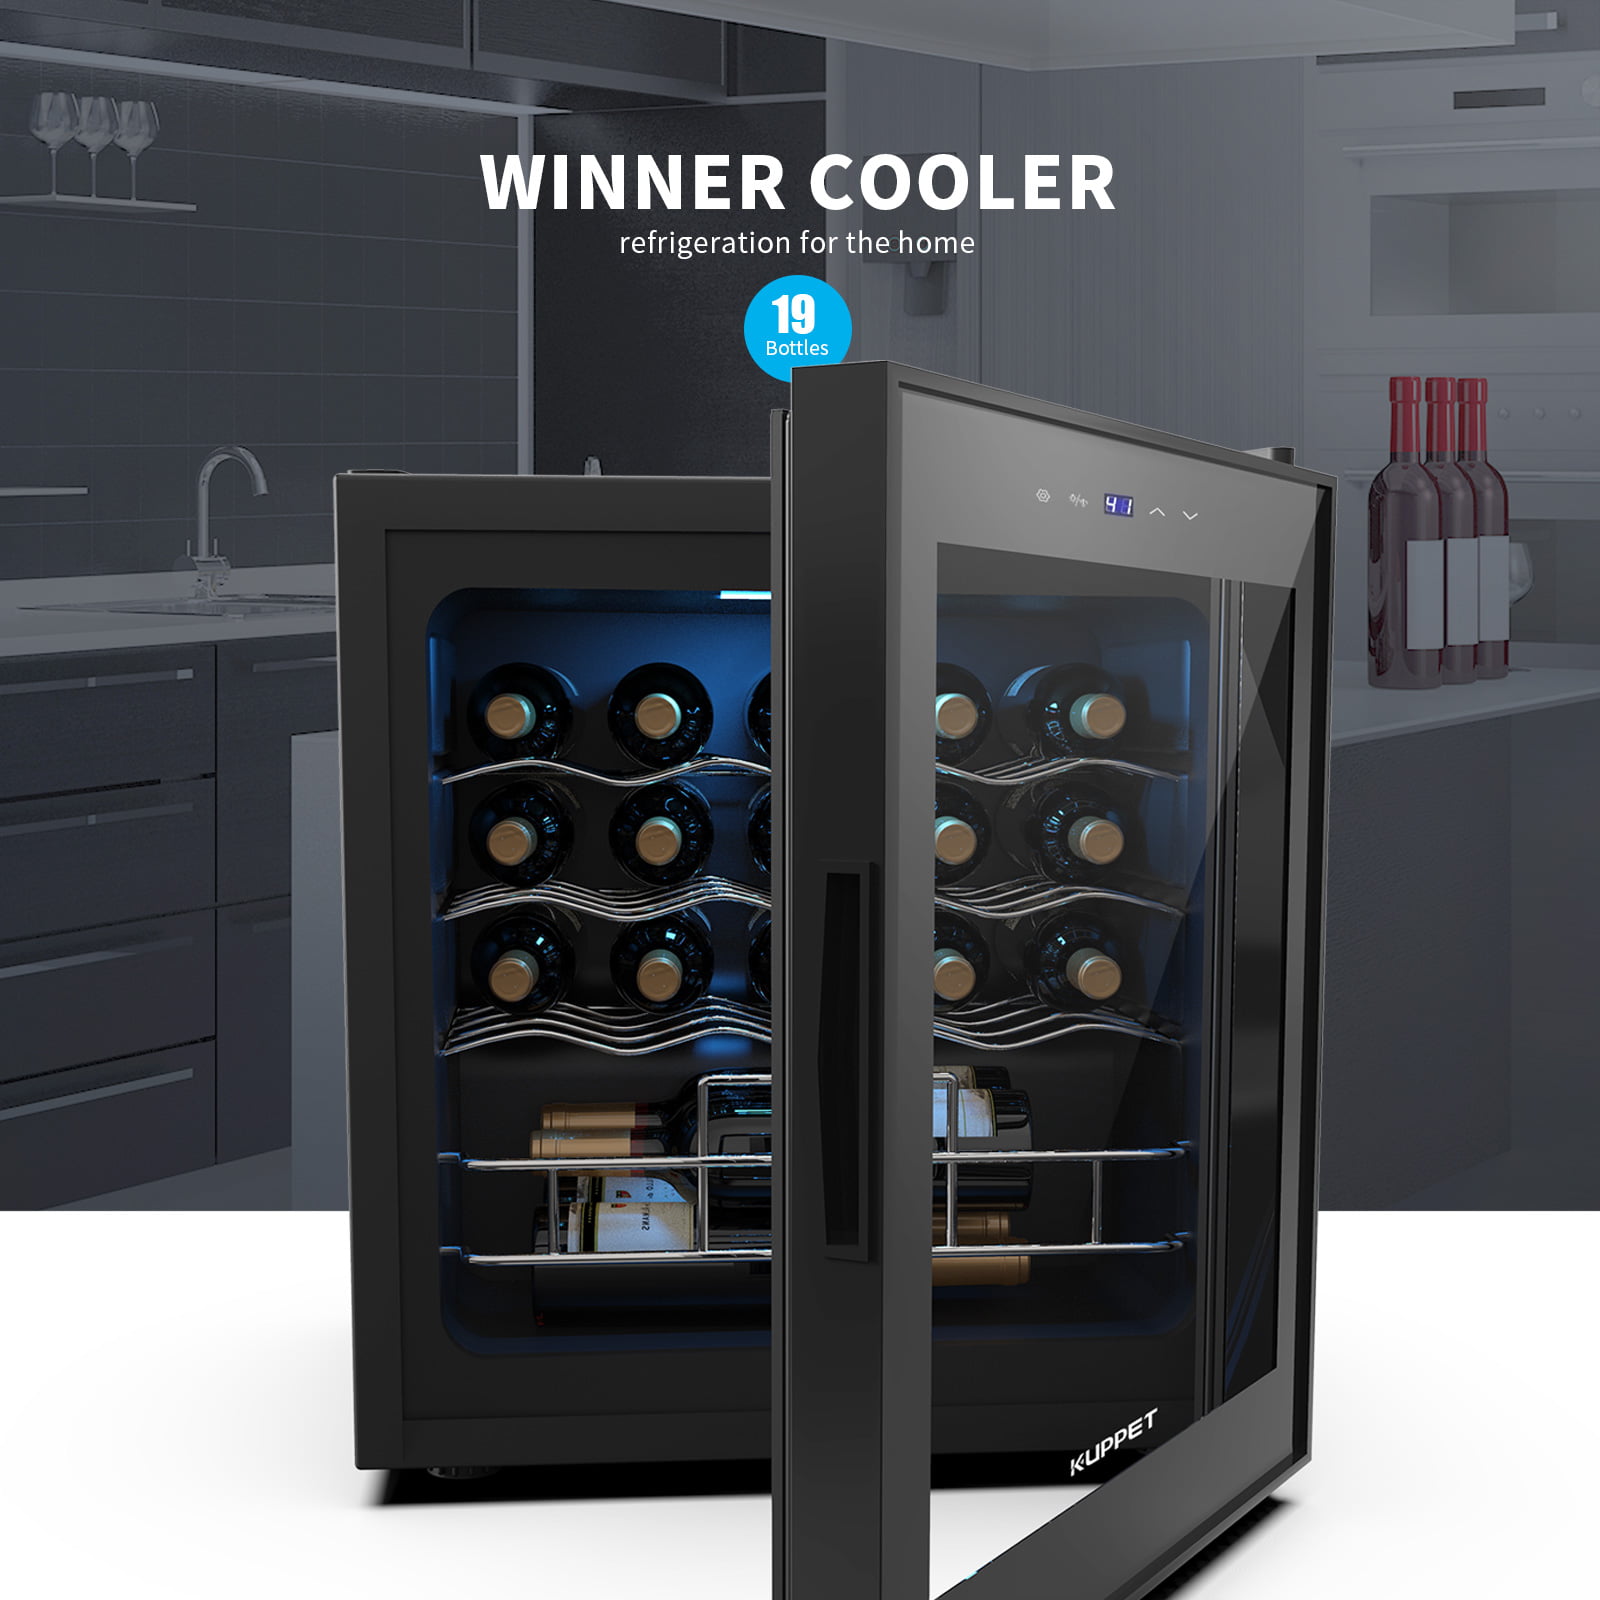 Beer and Champagne Wine Cellar-Digital Temperature Display-Double-layer Glass Door-Quiet Operation  KUPPET Thermoelectric Freestanding Chiller-Counter Top Red/White Wine 16 Bottles Wine Cooler